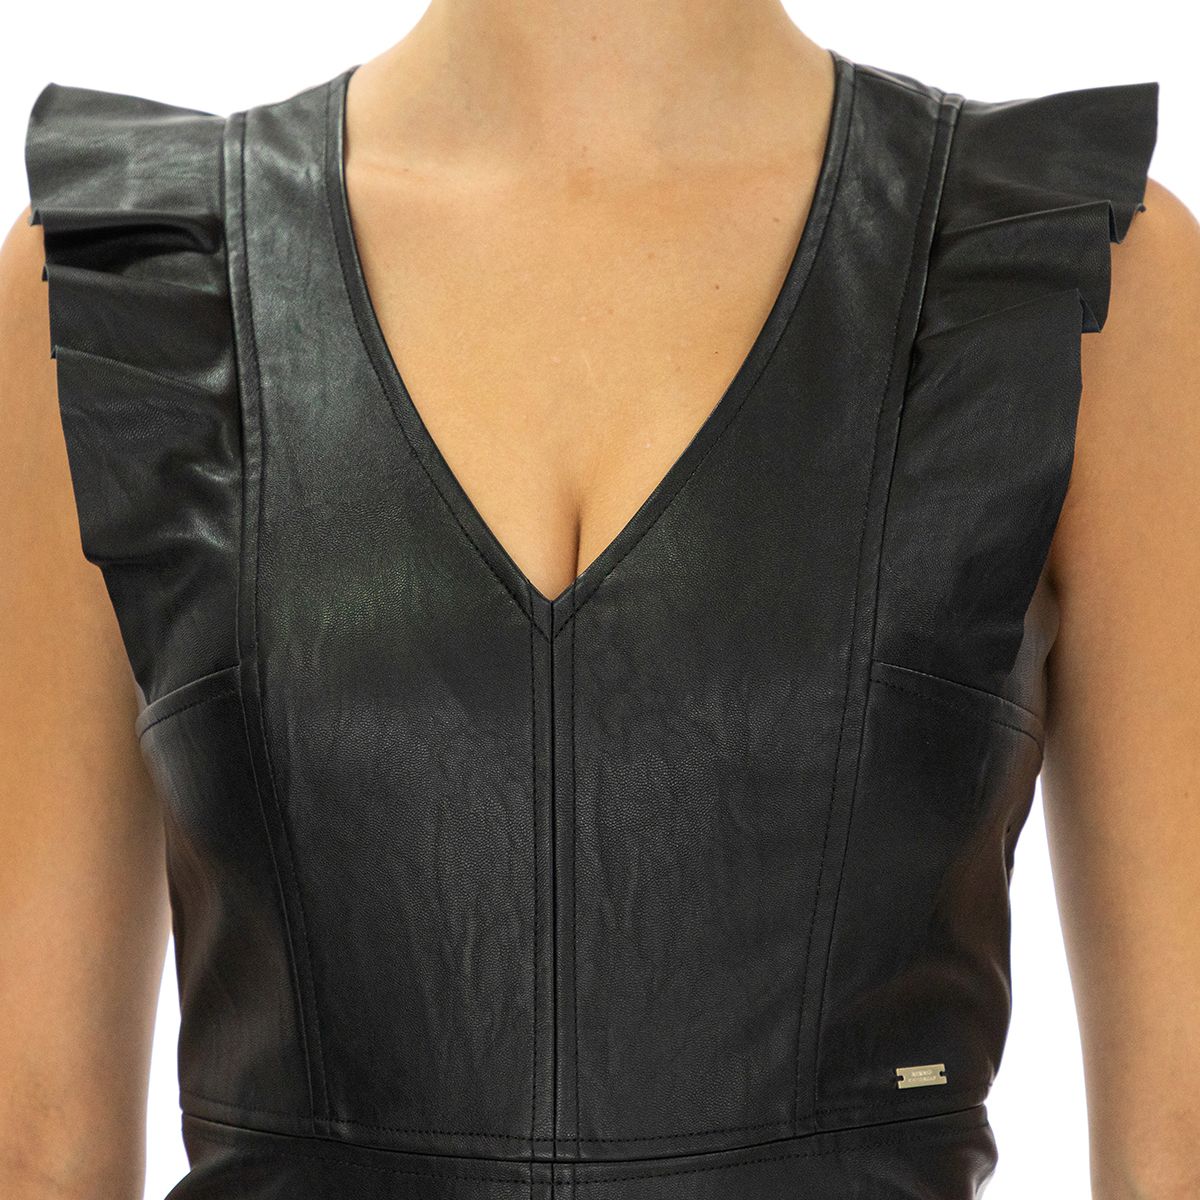 Armani Exchange 6ZYA52YNABZ-1200-14 This black dress with faux leather effect will give a bold touch to your evening look.